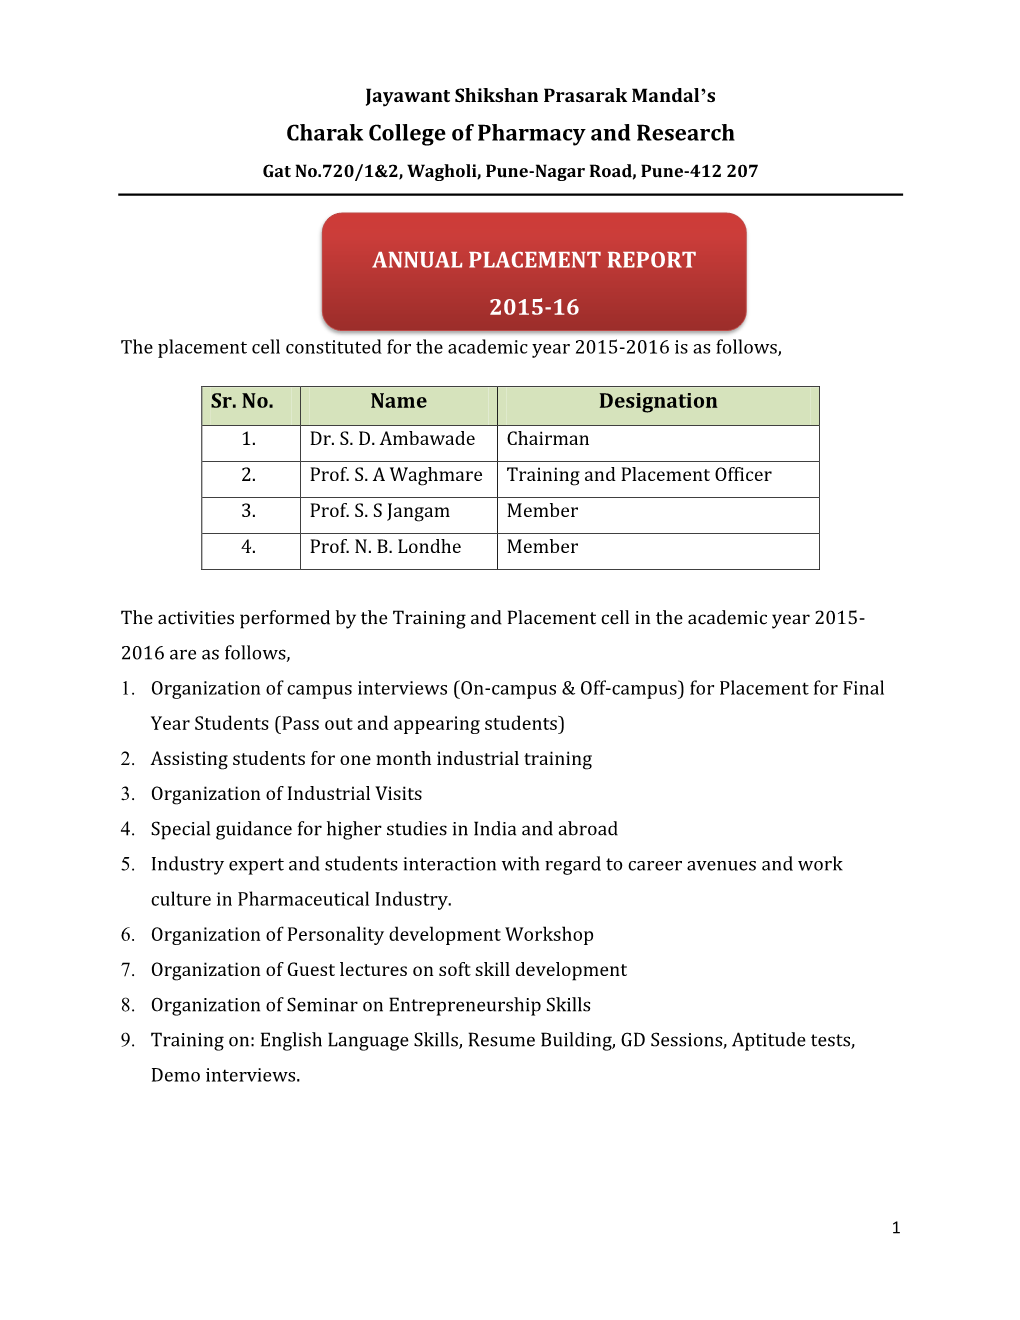 Placement Report 2015-16.Pdf